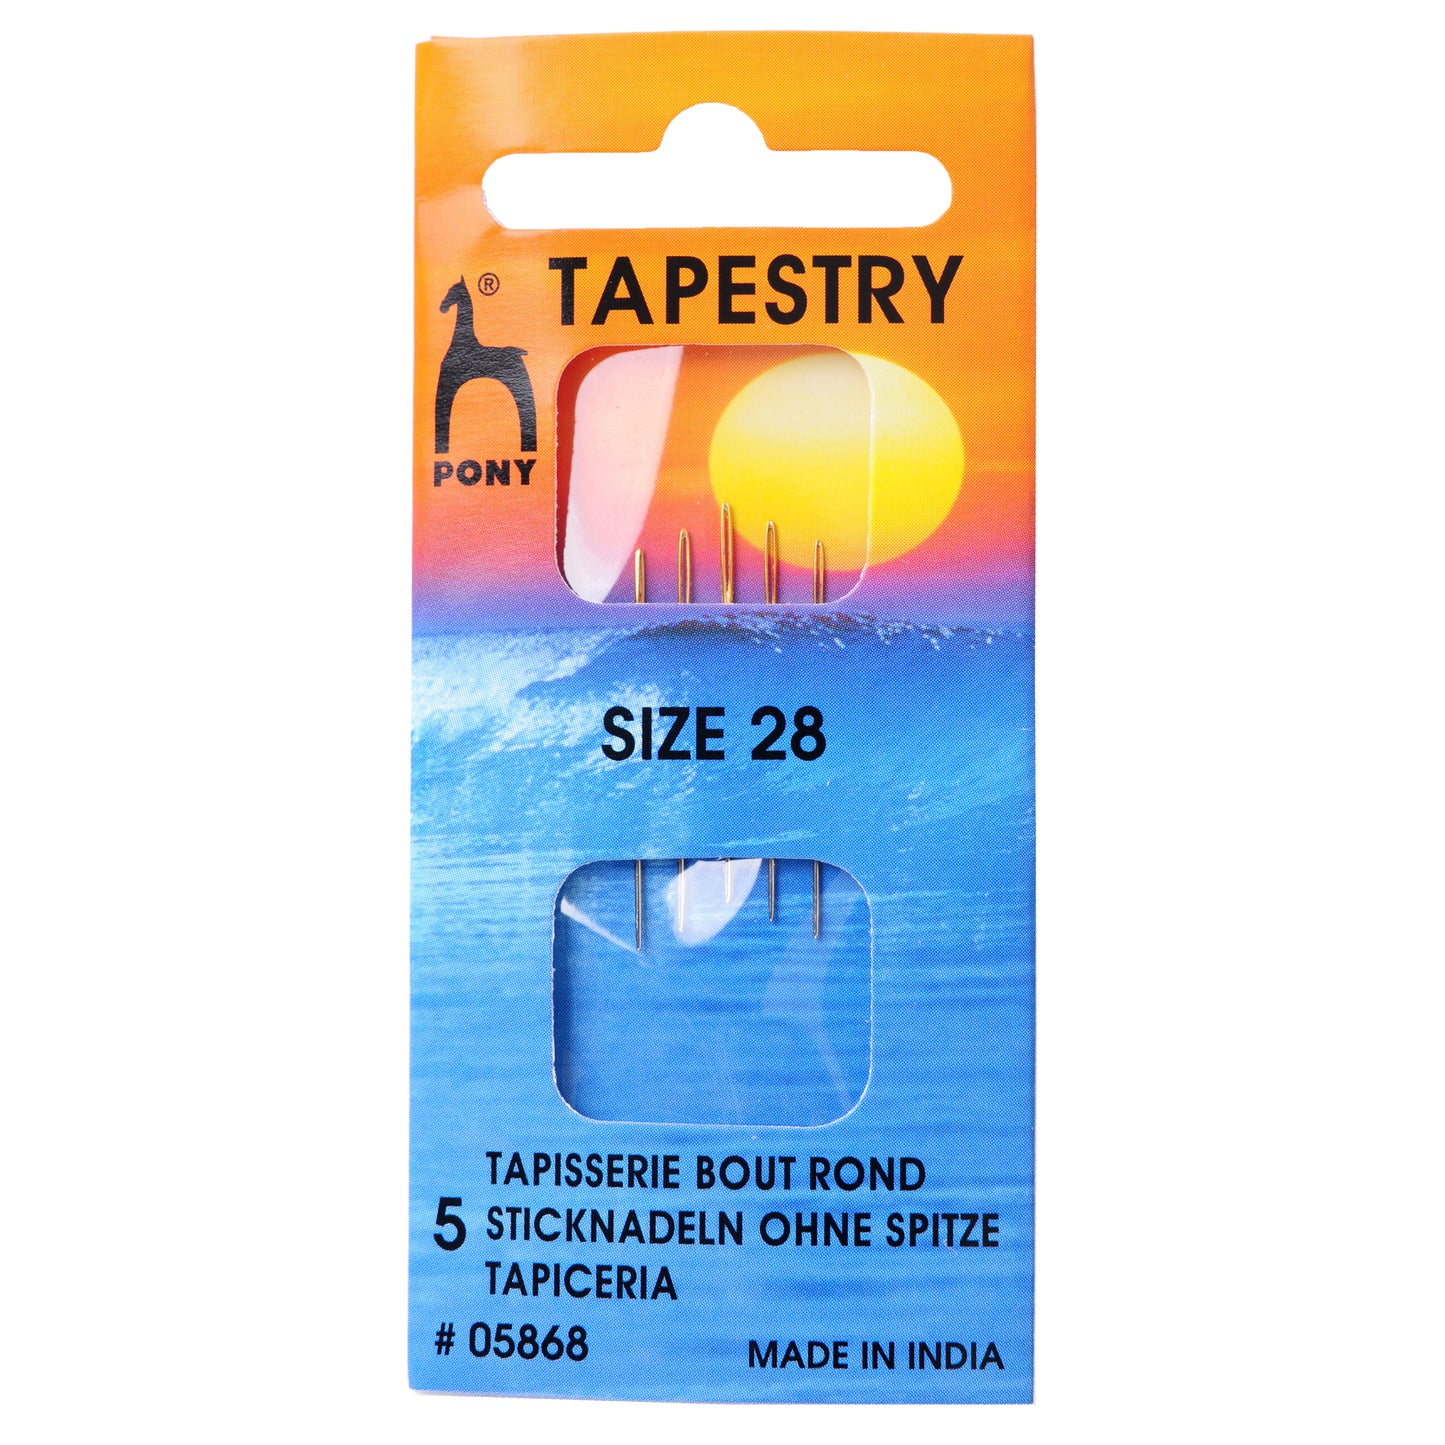 TAPESTRY NEEDLES - Size 28 - Pack of 5